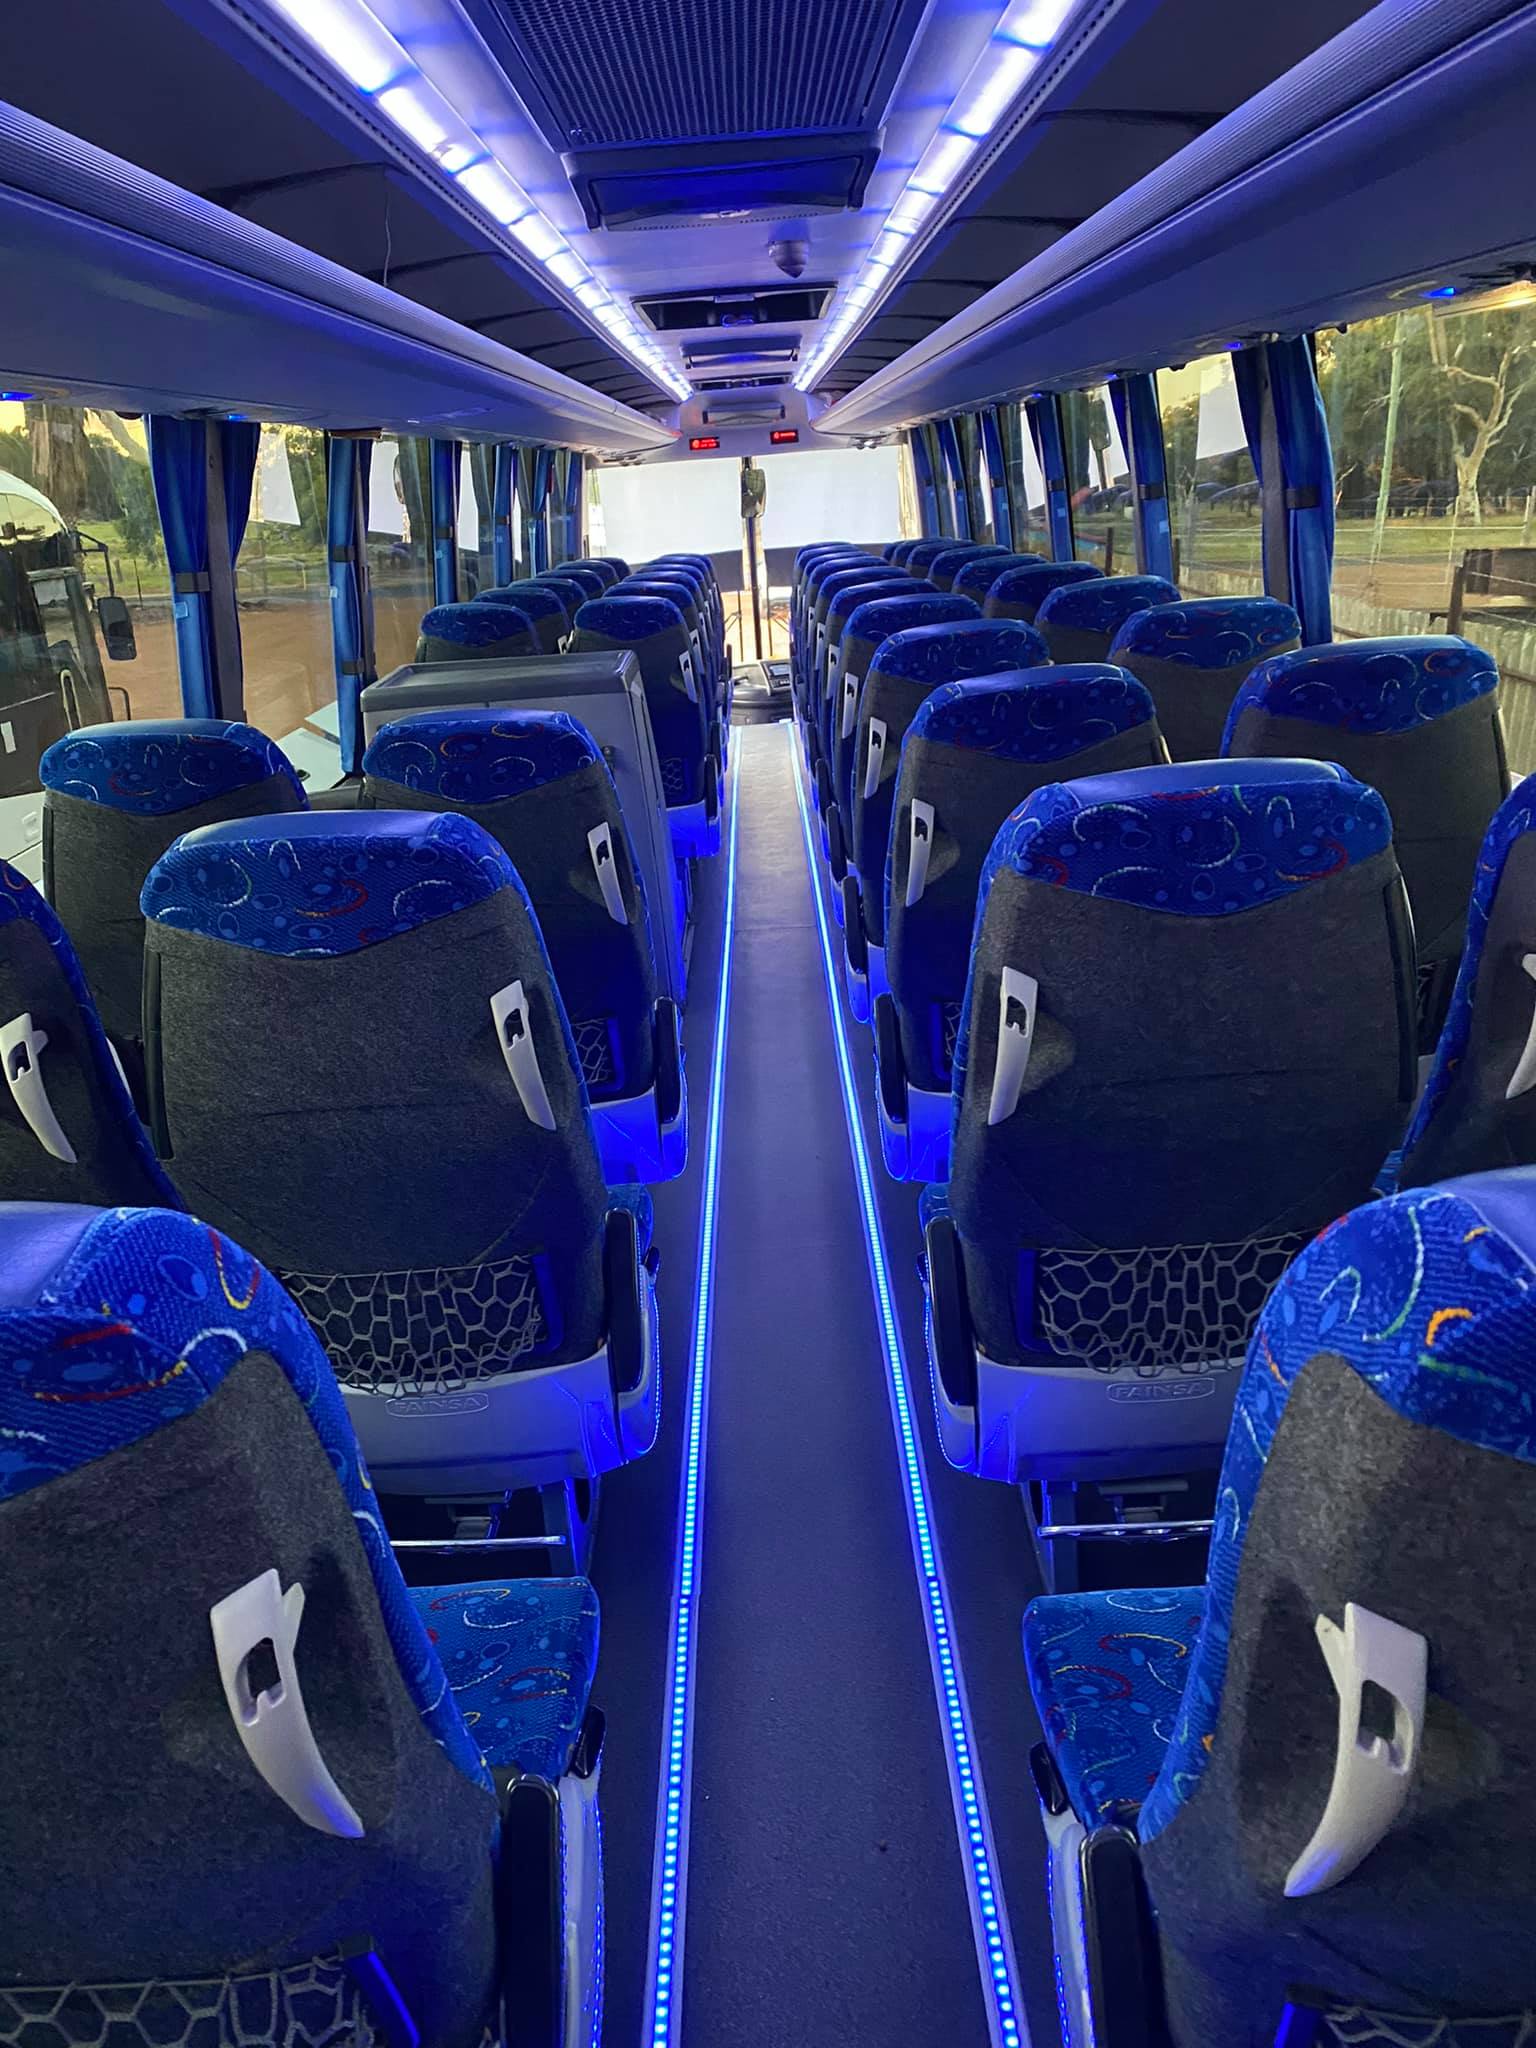 Modern, and clean bus interiors